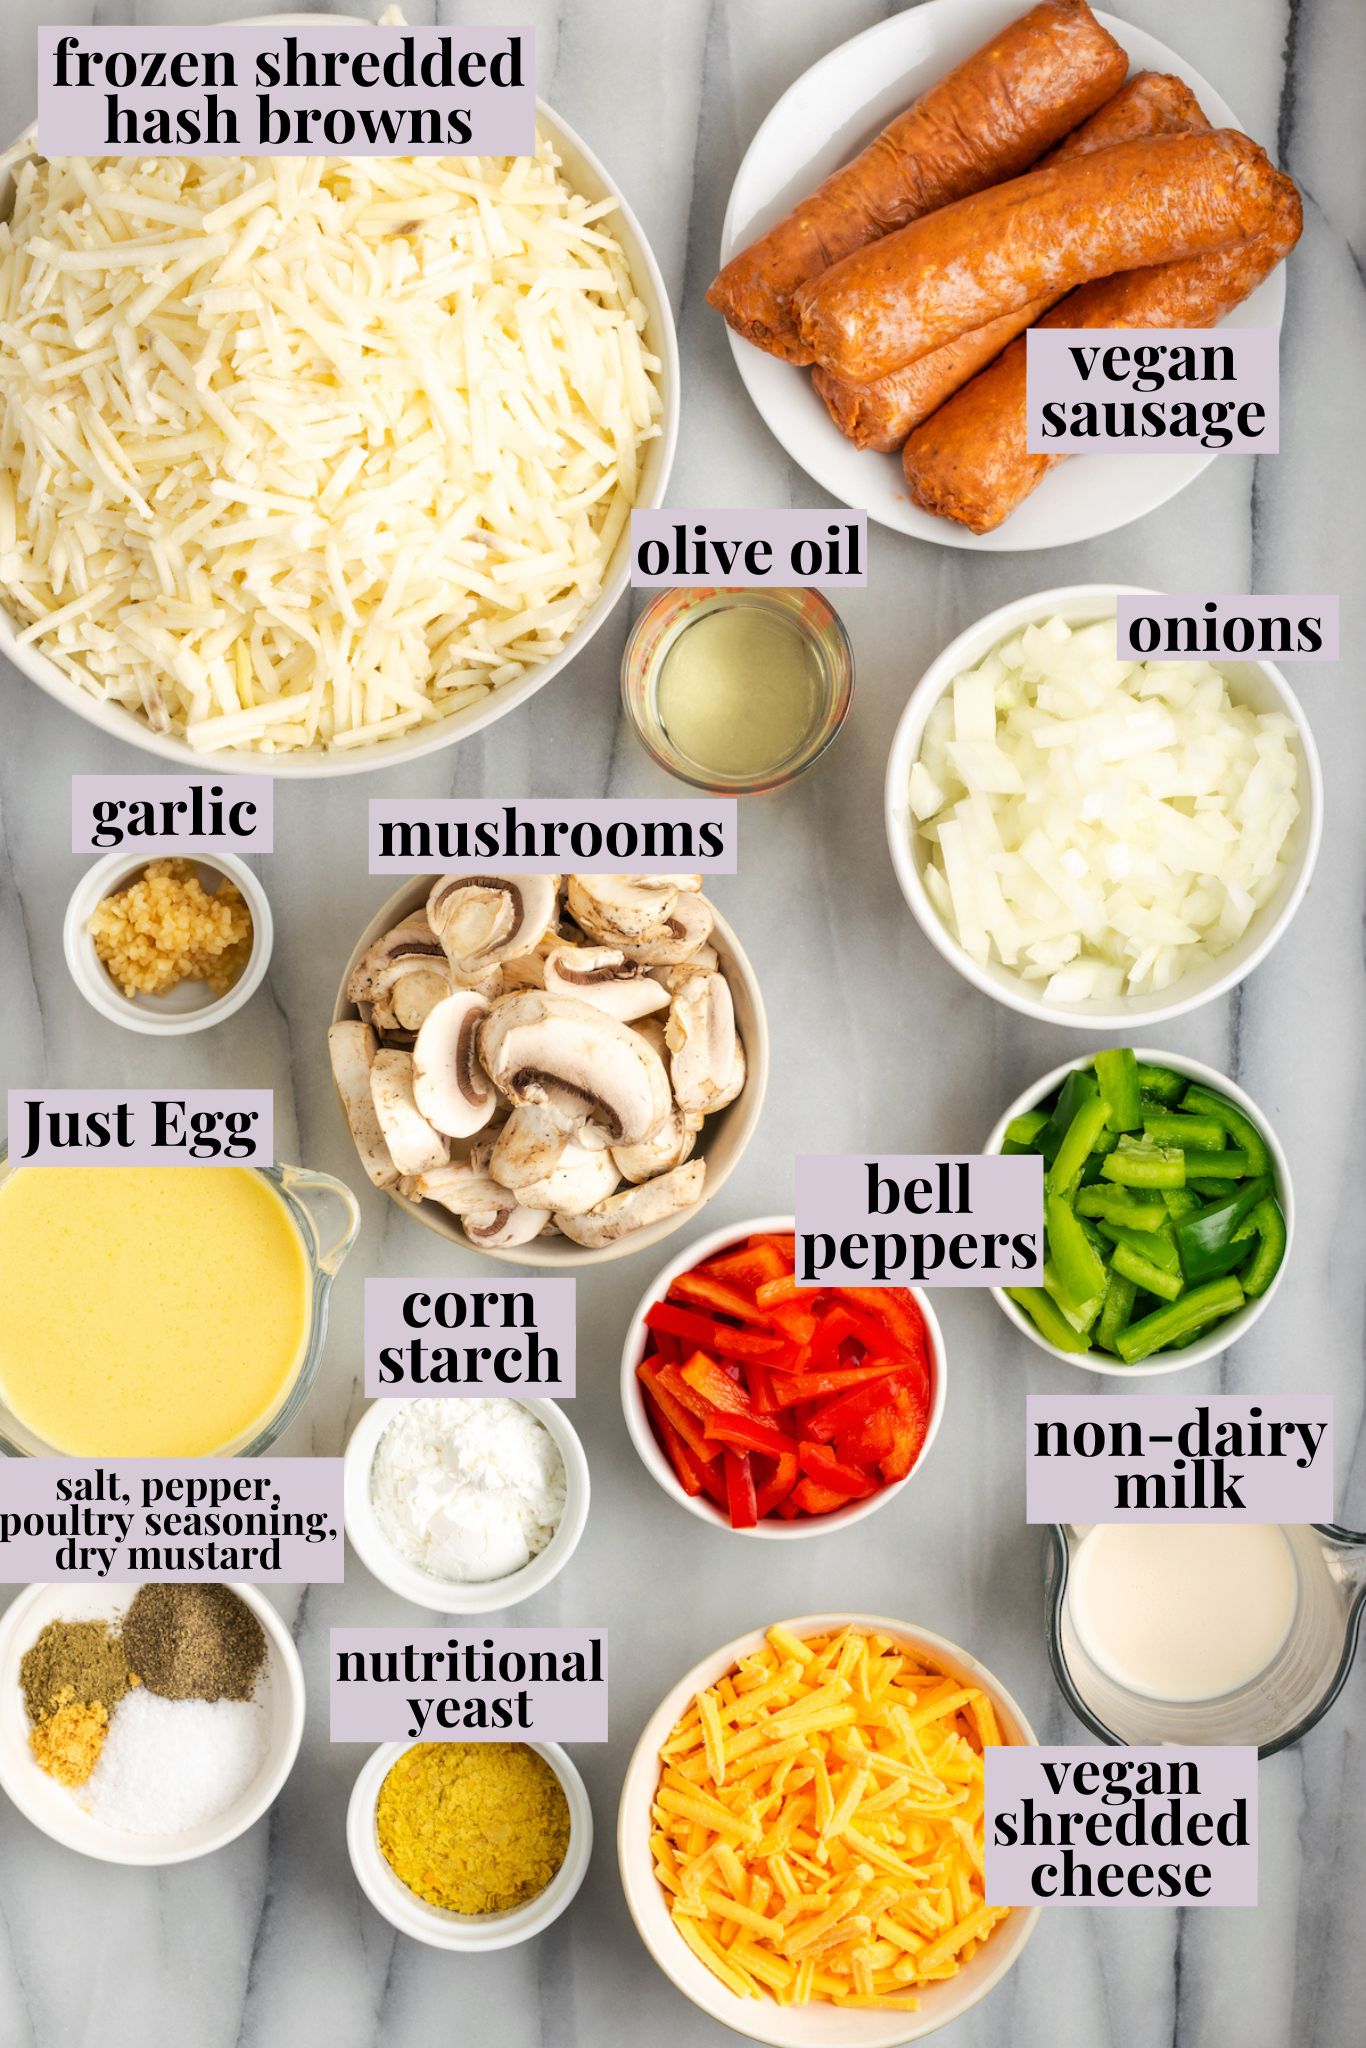 Overhead view of ingredients for hashbrown breakfast casserole with labels